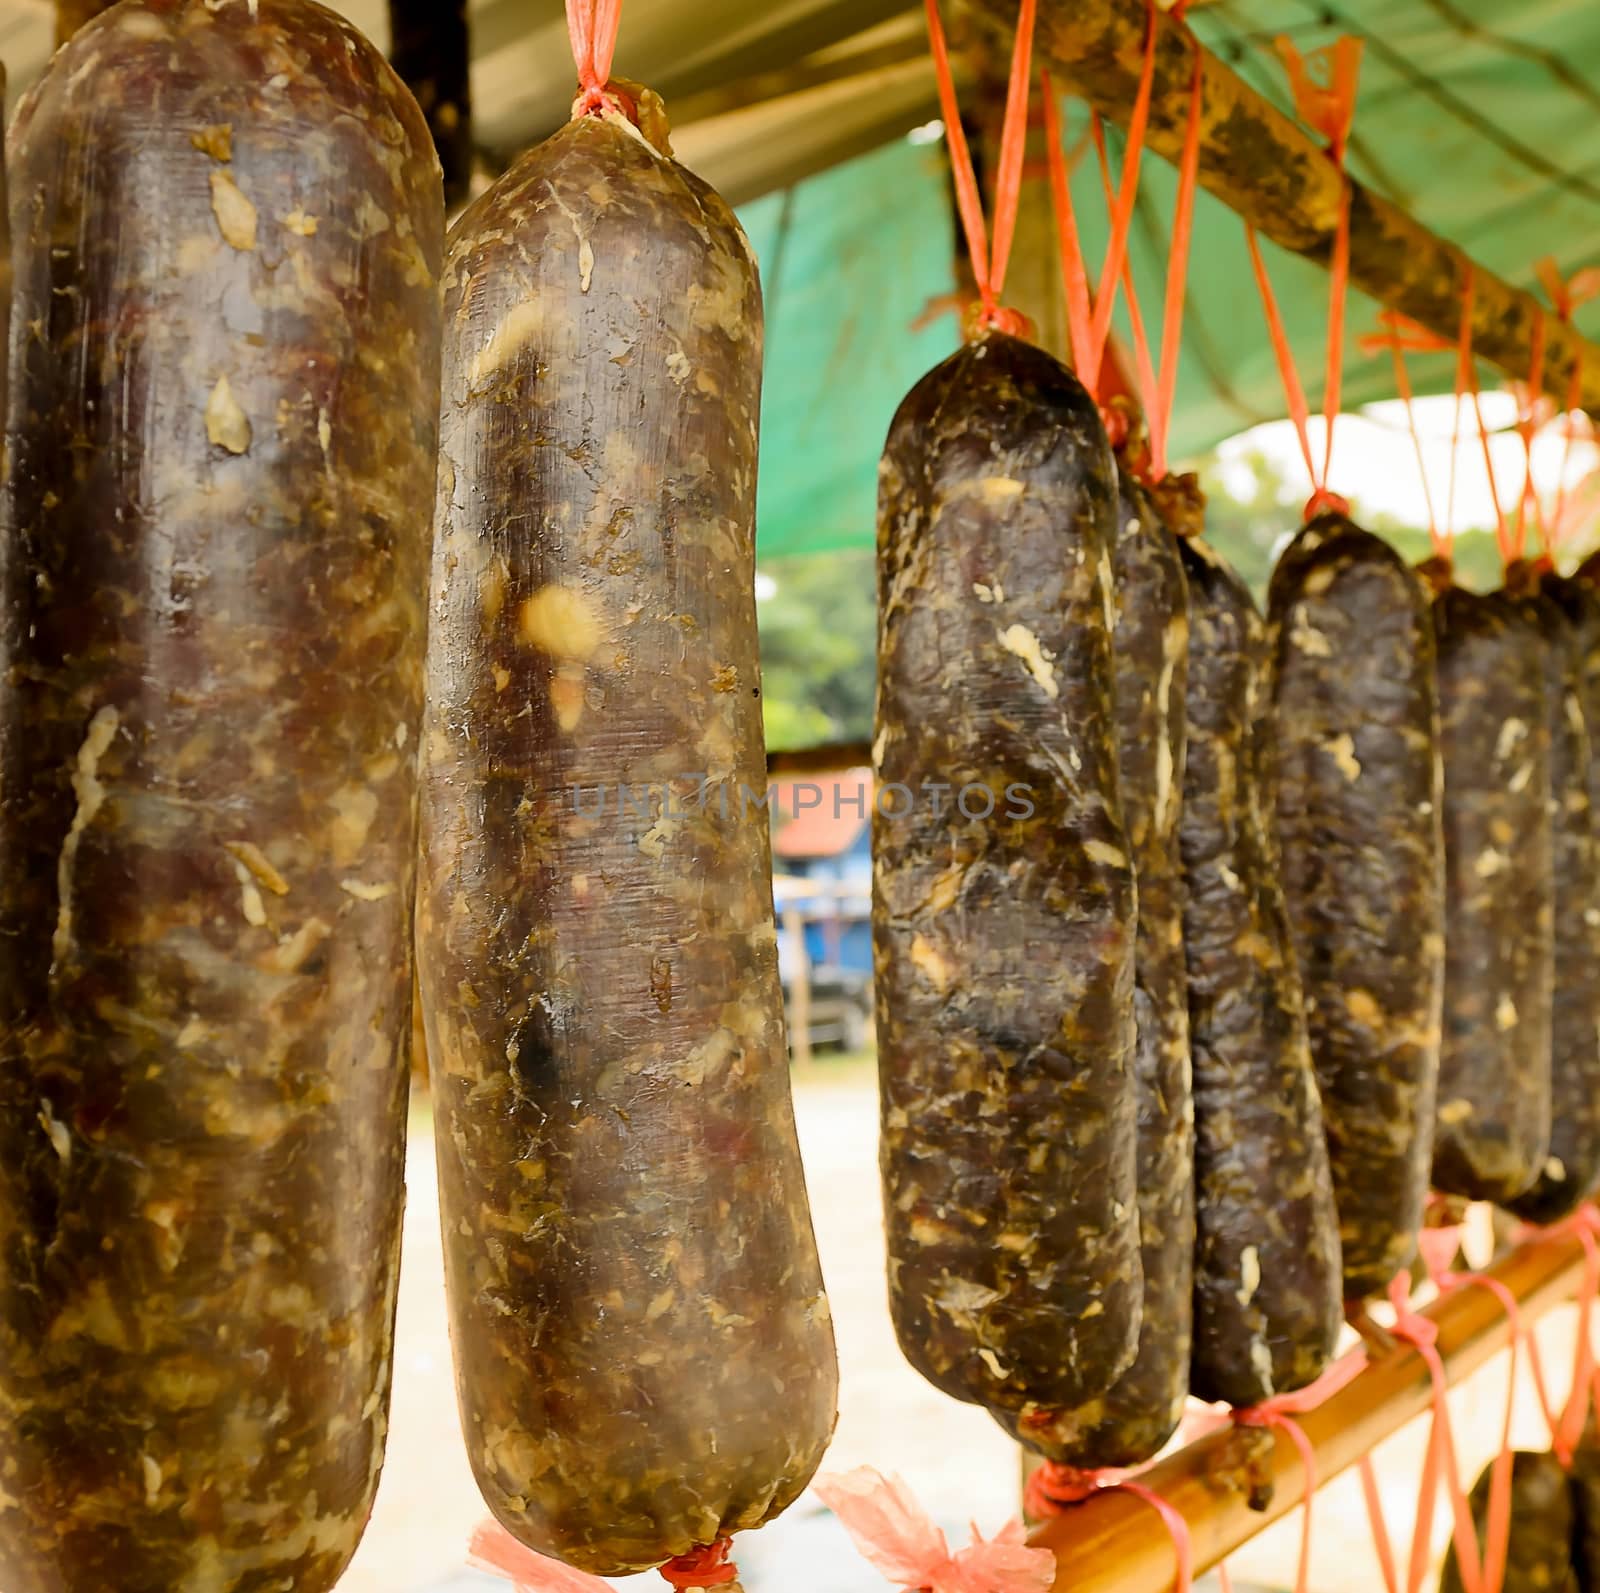 local Sausage Food Preservation in Northern East of Thailand by kobfujar